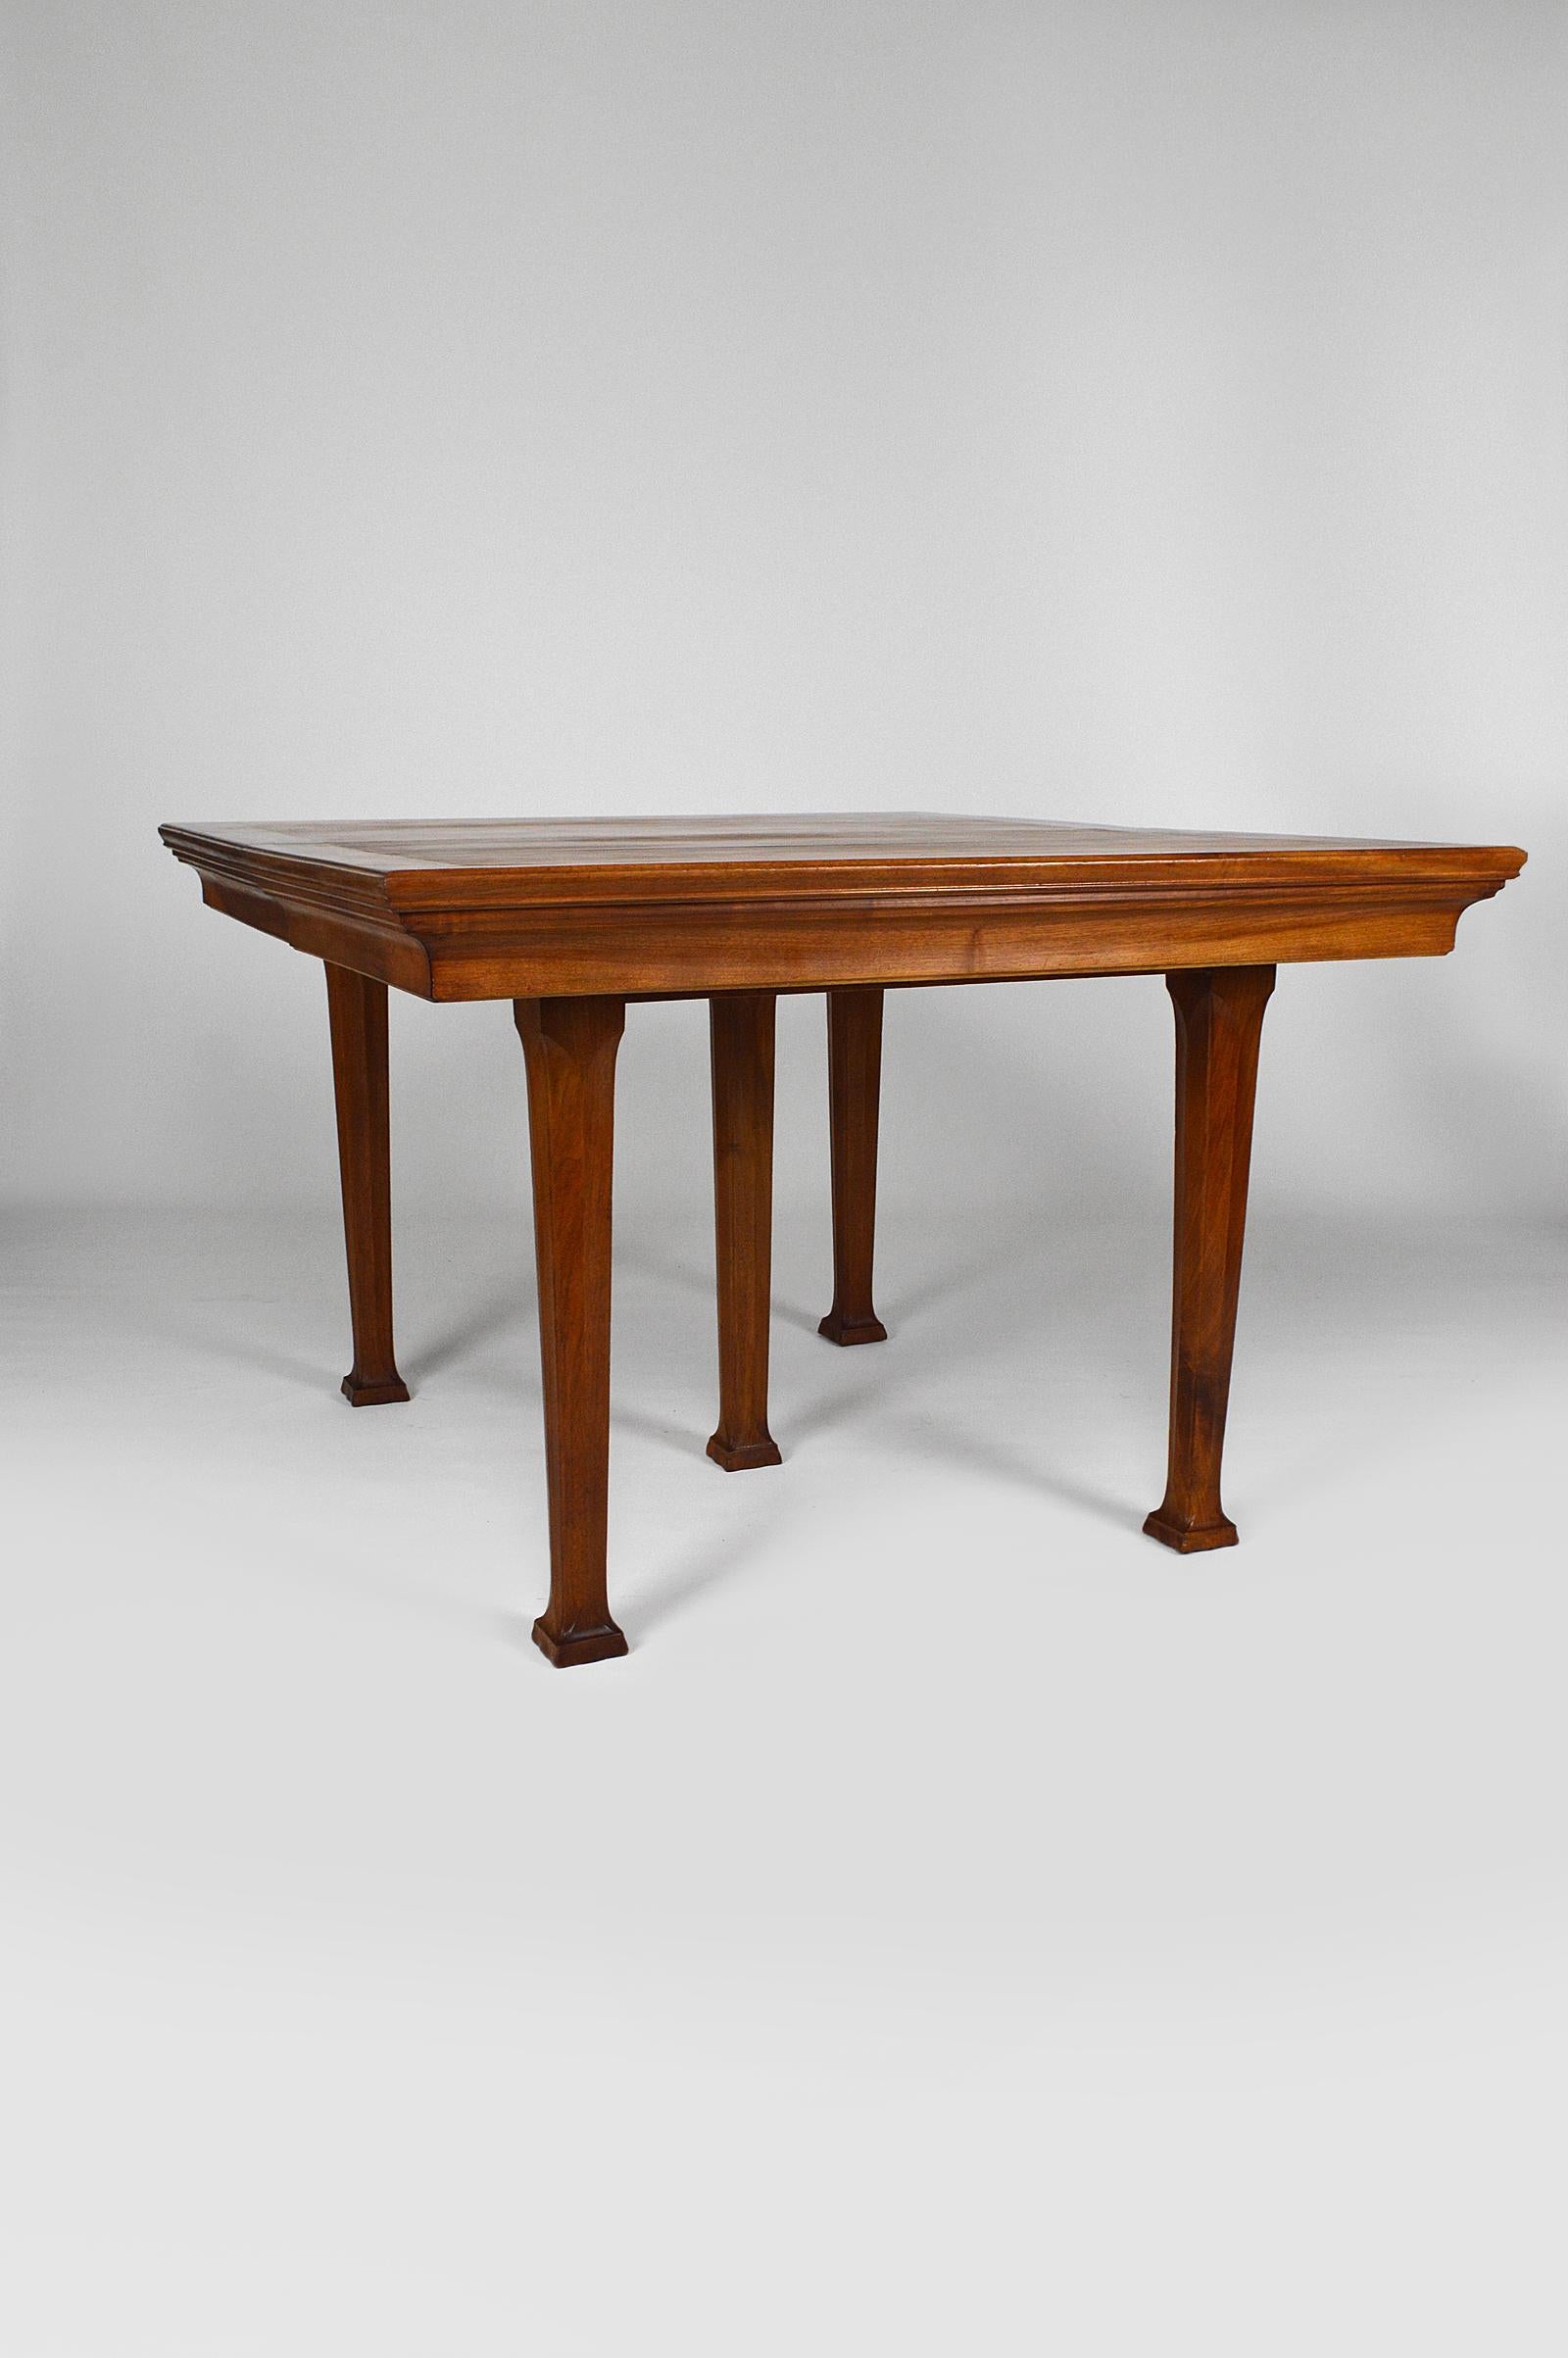 Beautiful and elegant french dining room table with 5 legs in carved walnut.

In very good condition, restored, stripped, treated against xylophages, polished waxed finish.

Art Nouveau / School of Nancy (